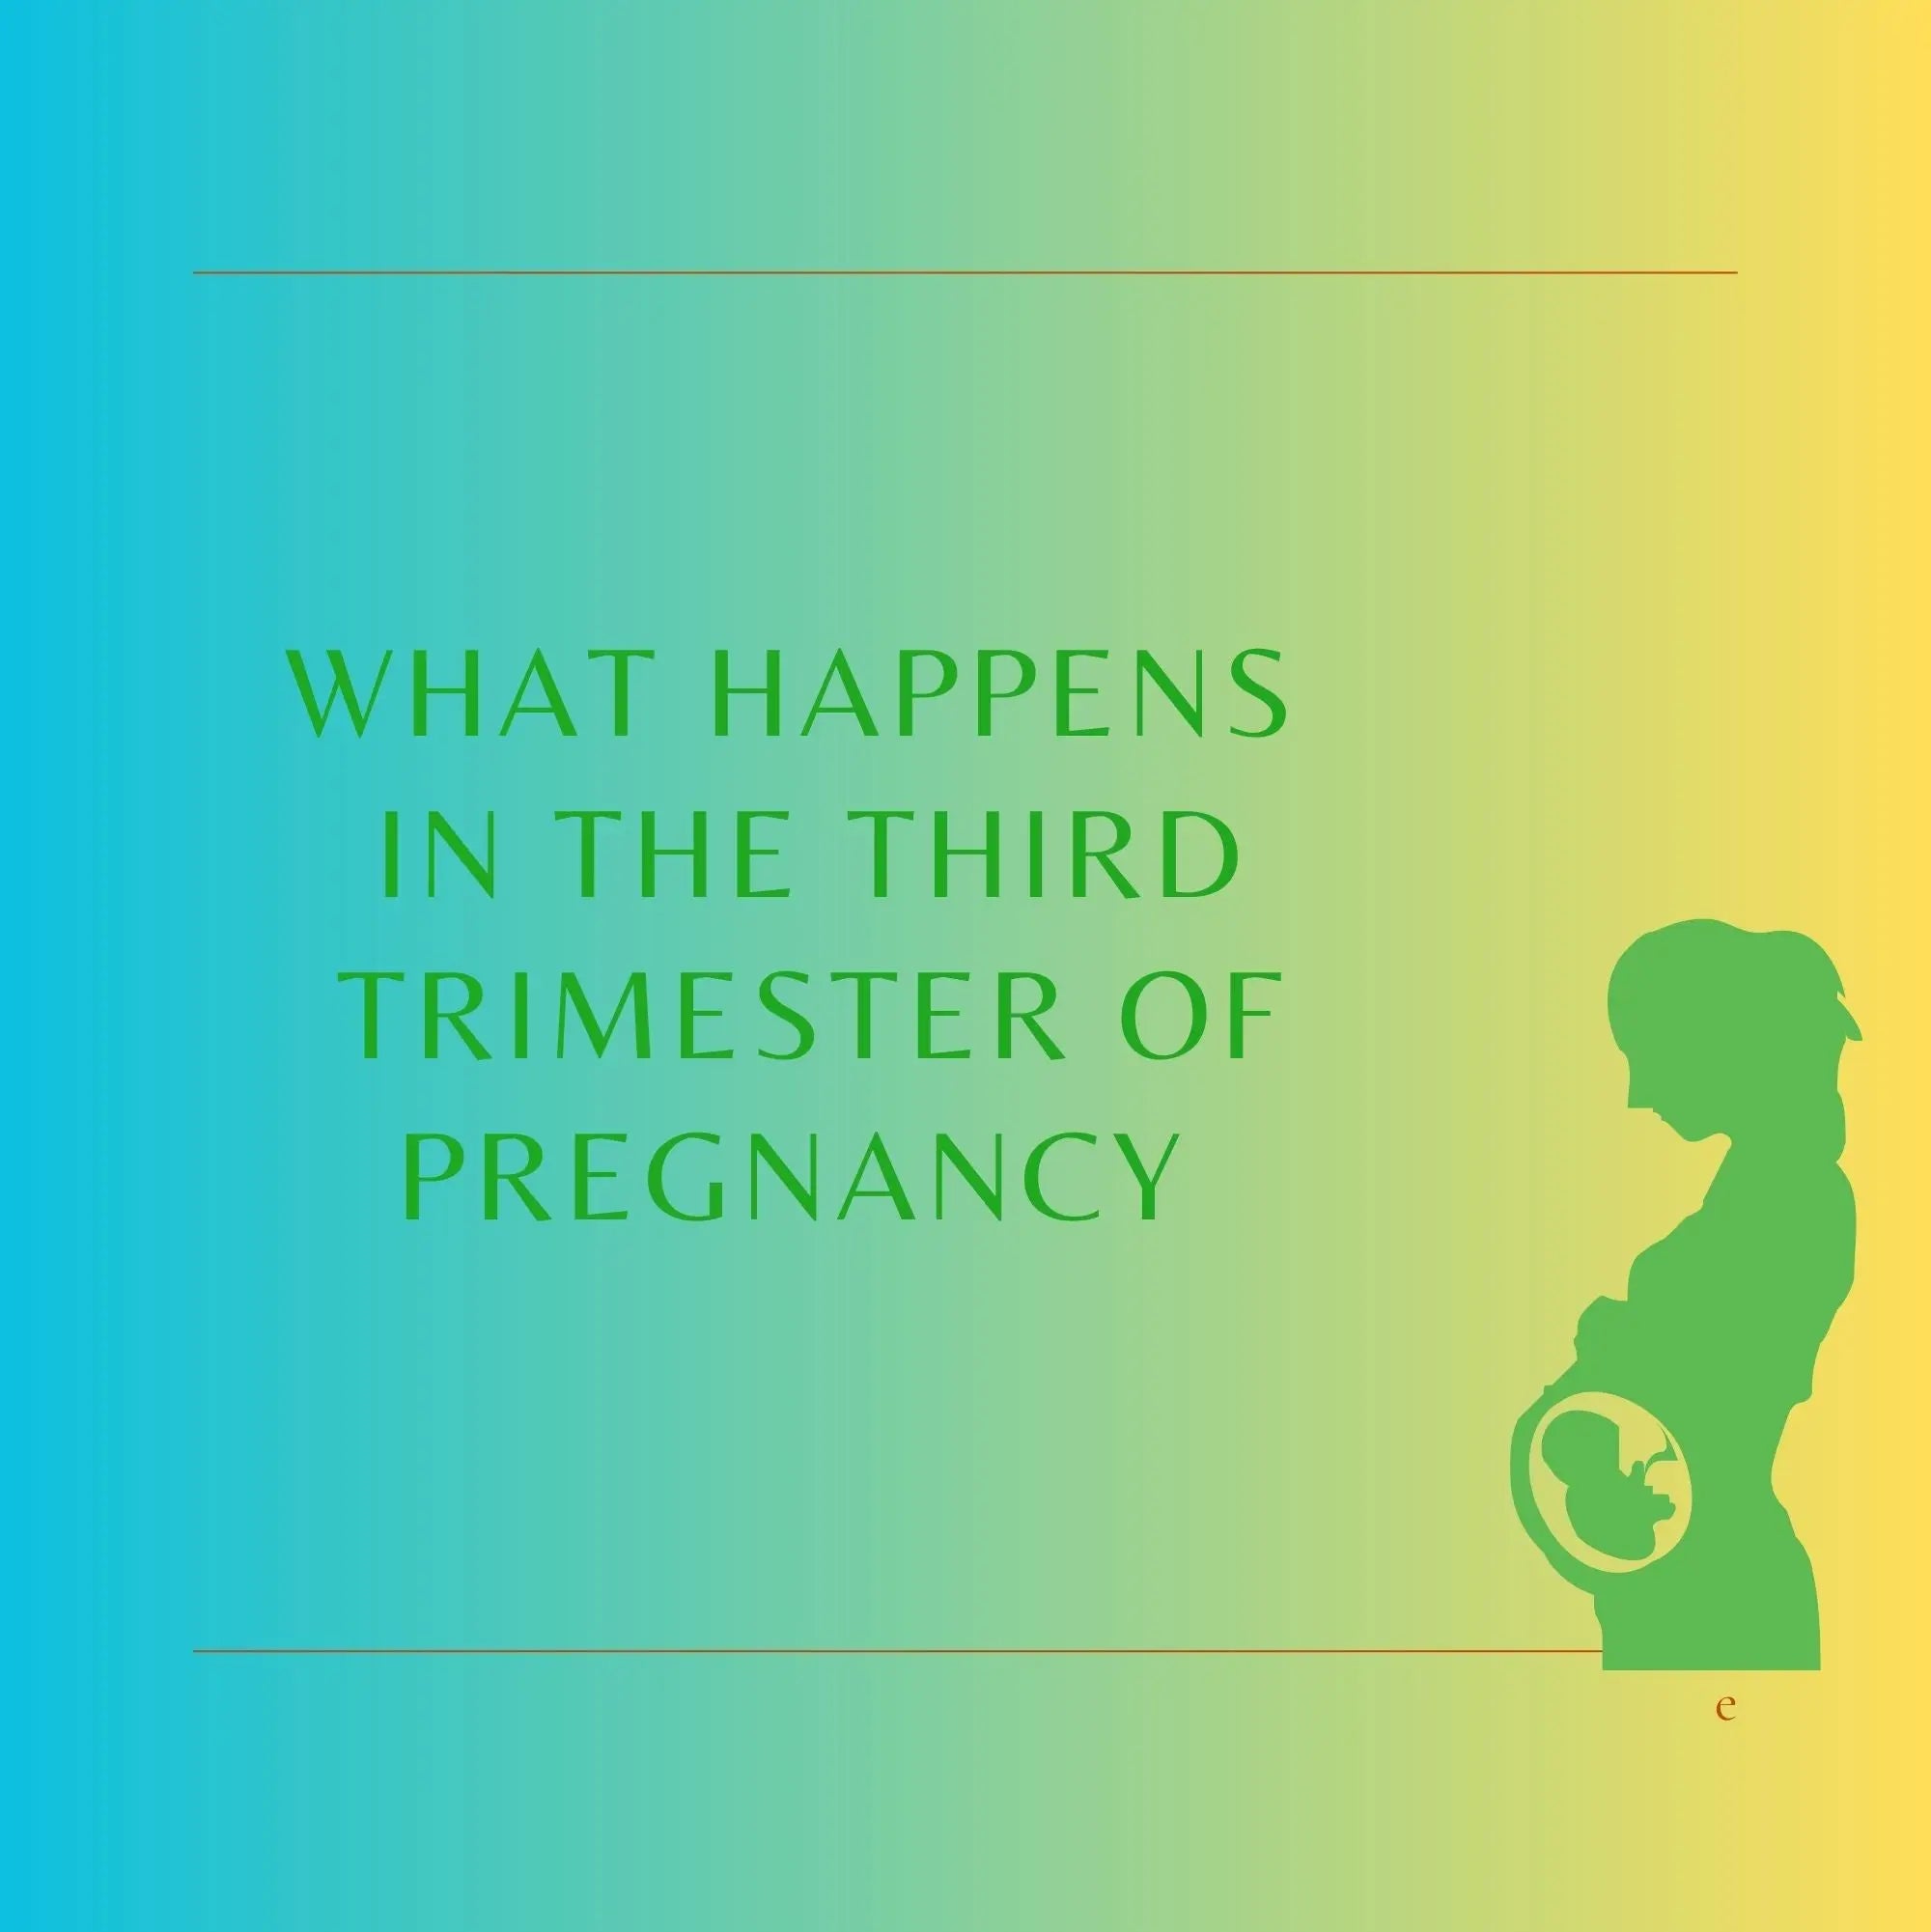 What Happens in the Third Trimester of Pregnancy